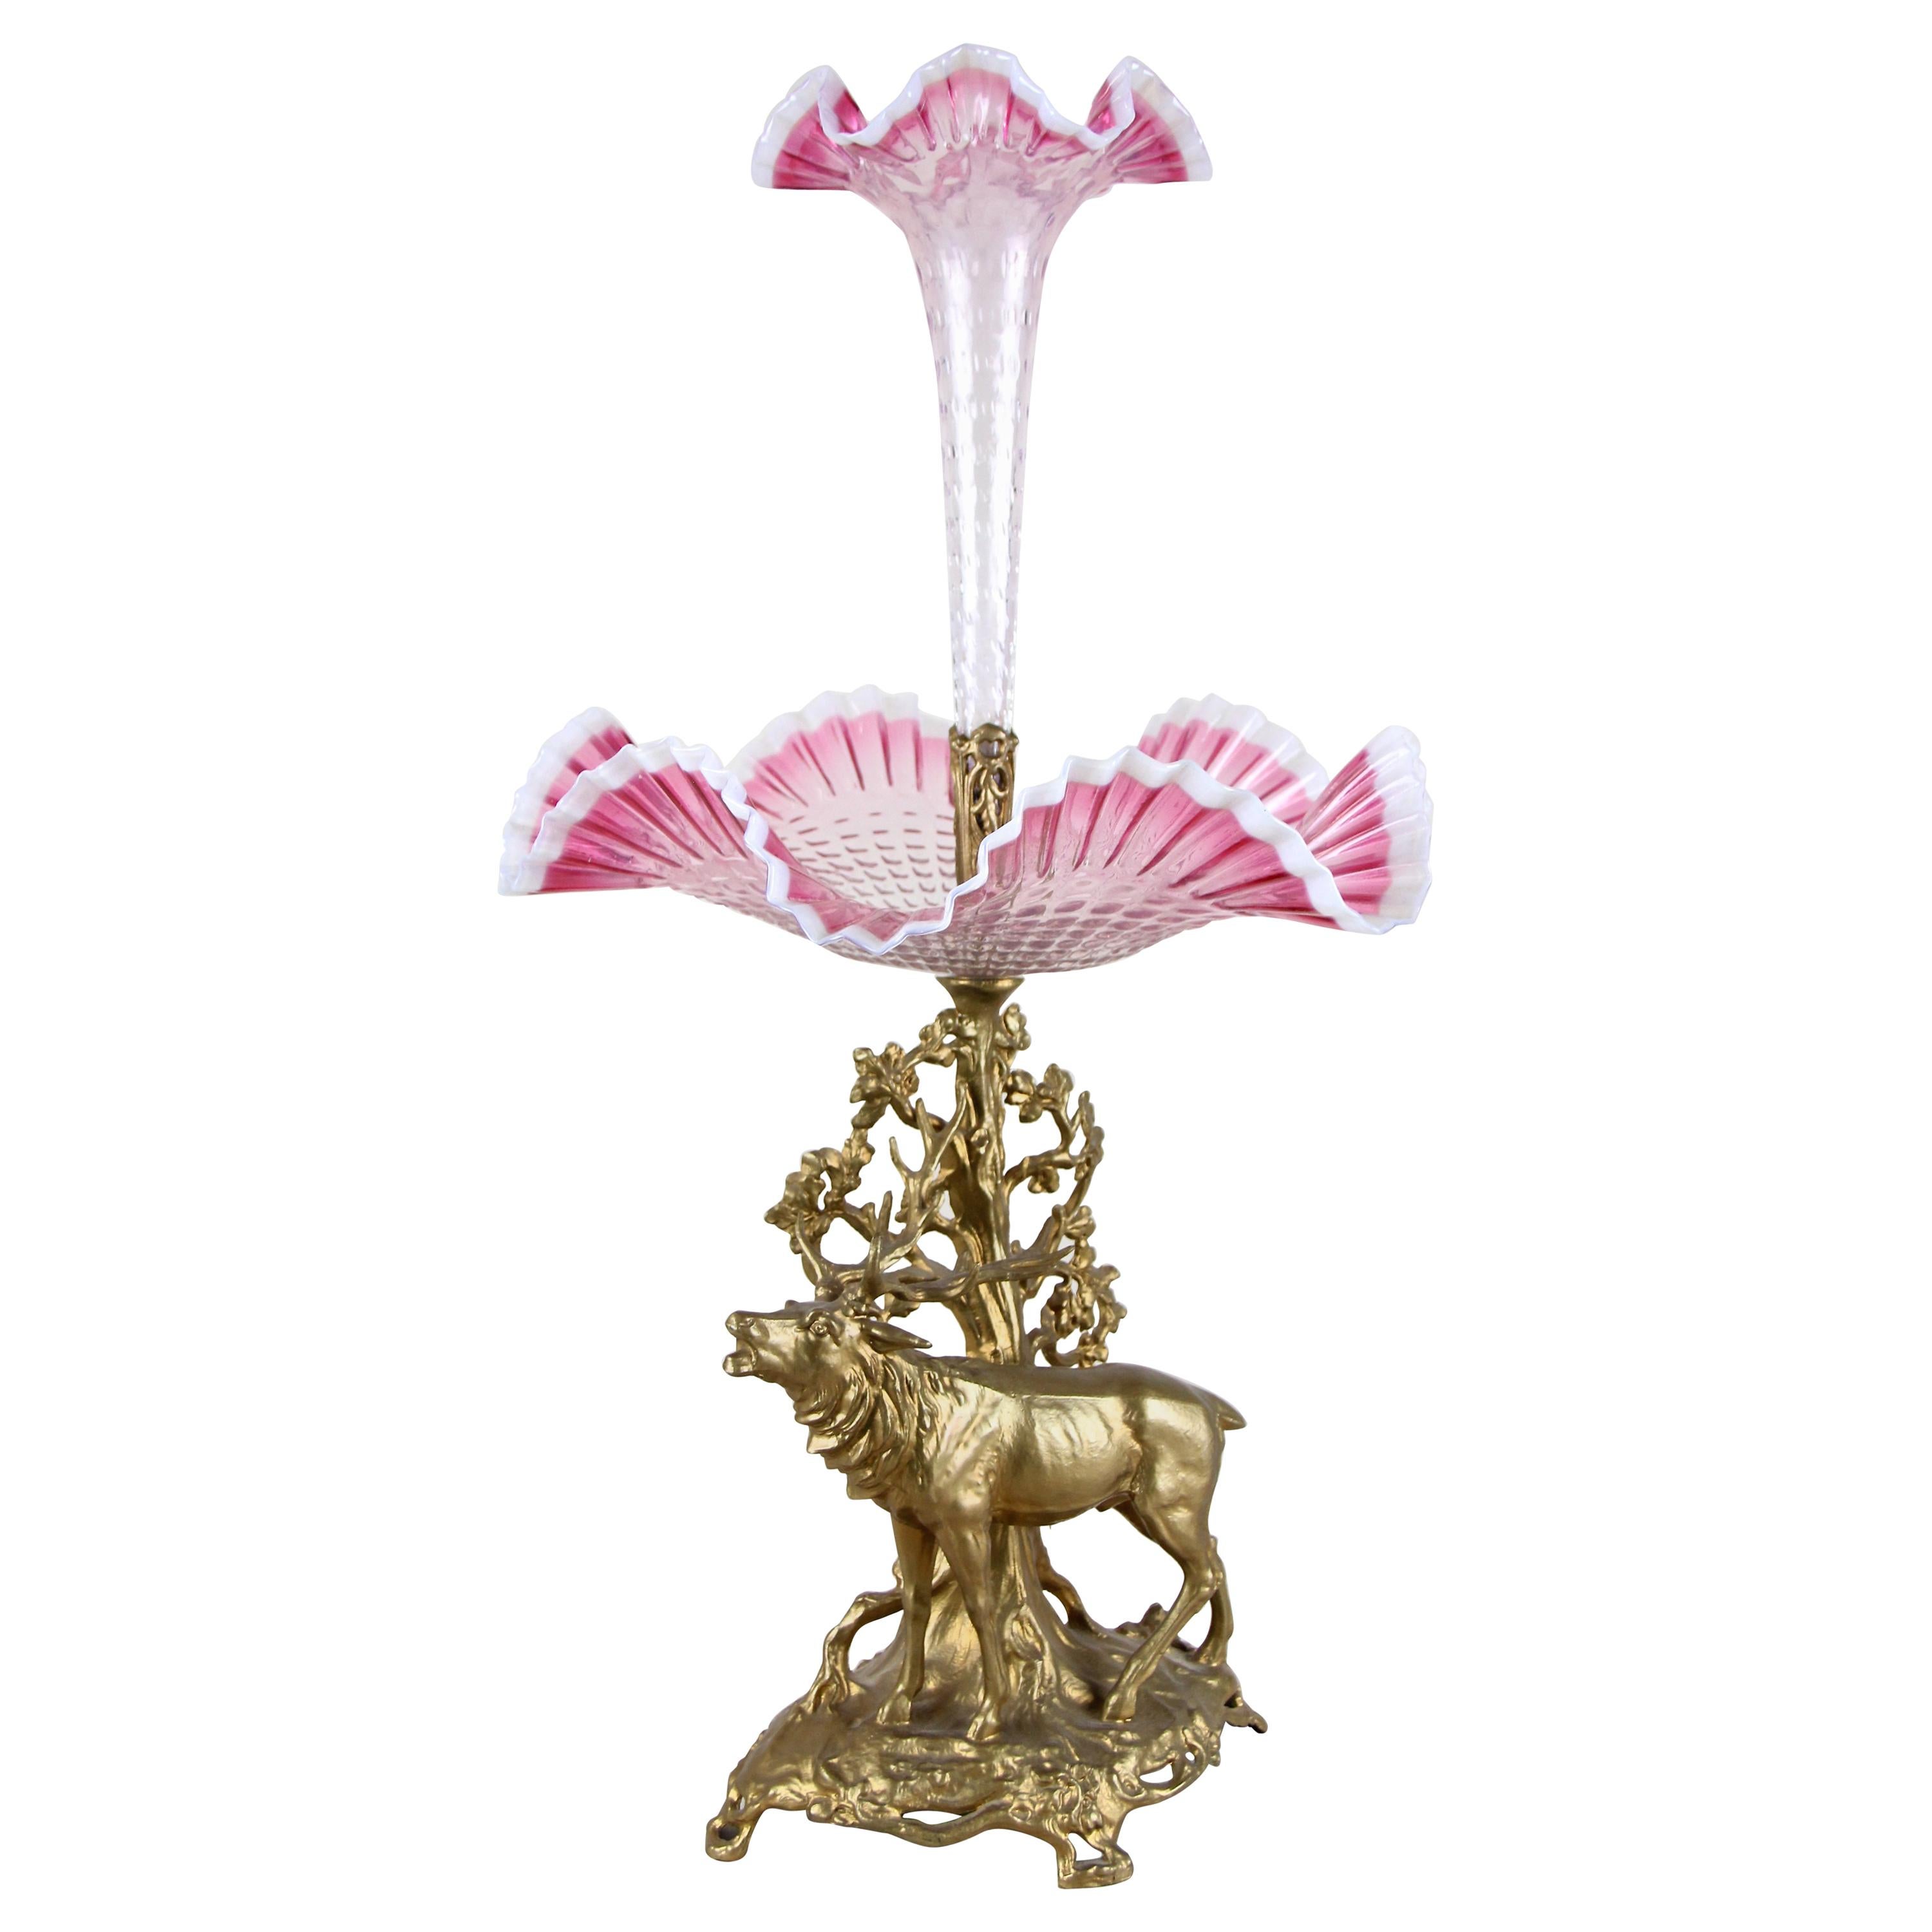 Extraordinary, large Art Nouveau centerpiece with frilly glass bowl and vase, made in Austria in the turn of the century circa 1900. The beautiful pastel pink shining glass bowl sits on an artfully processed bronzed metal cast base depicting a